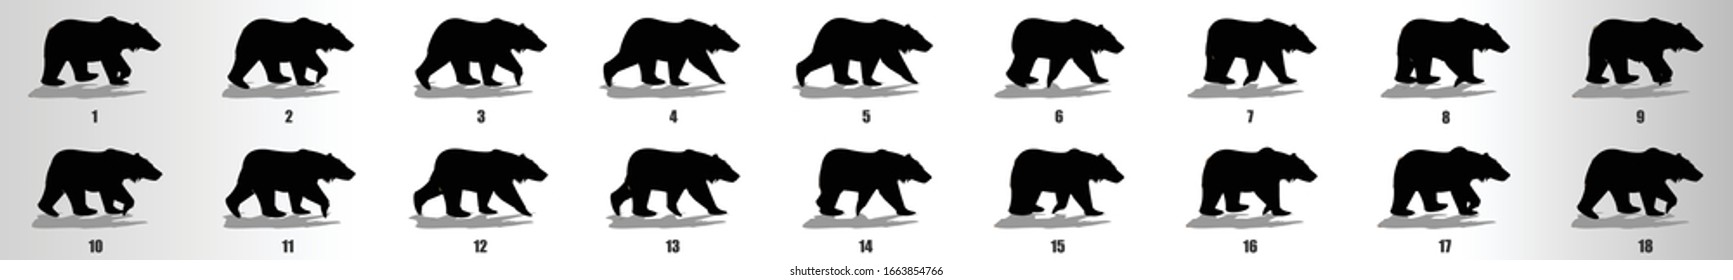 Bear Walk Cycle Animation Frames Silhouette, Loop Animation Sequence Sprite Sheet 